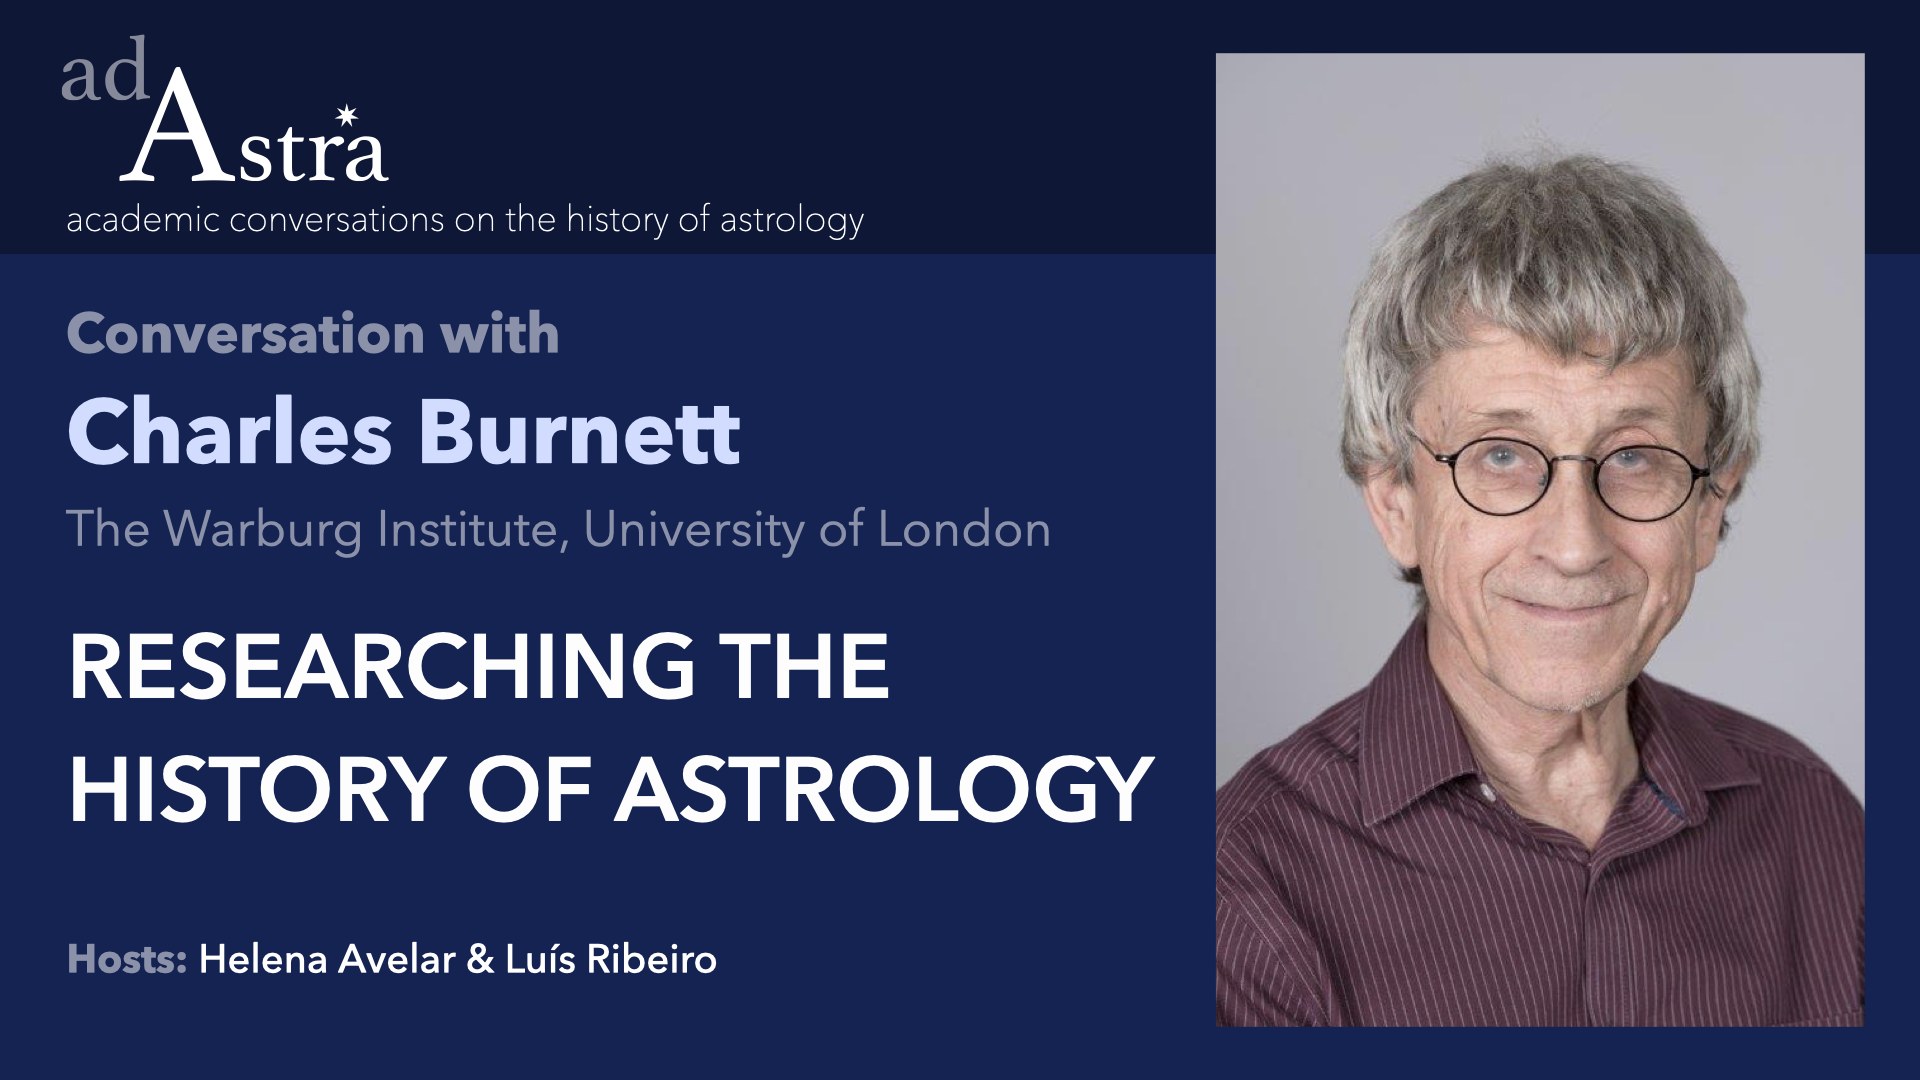 Researching the History of Astrology with Charles Burnett